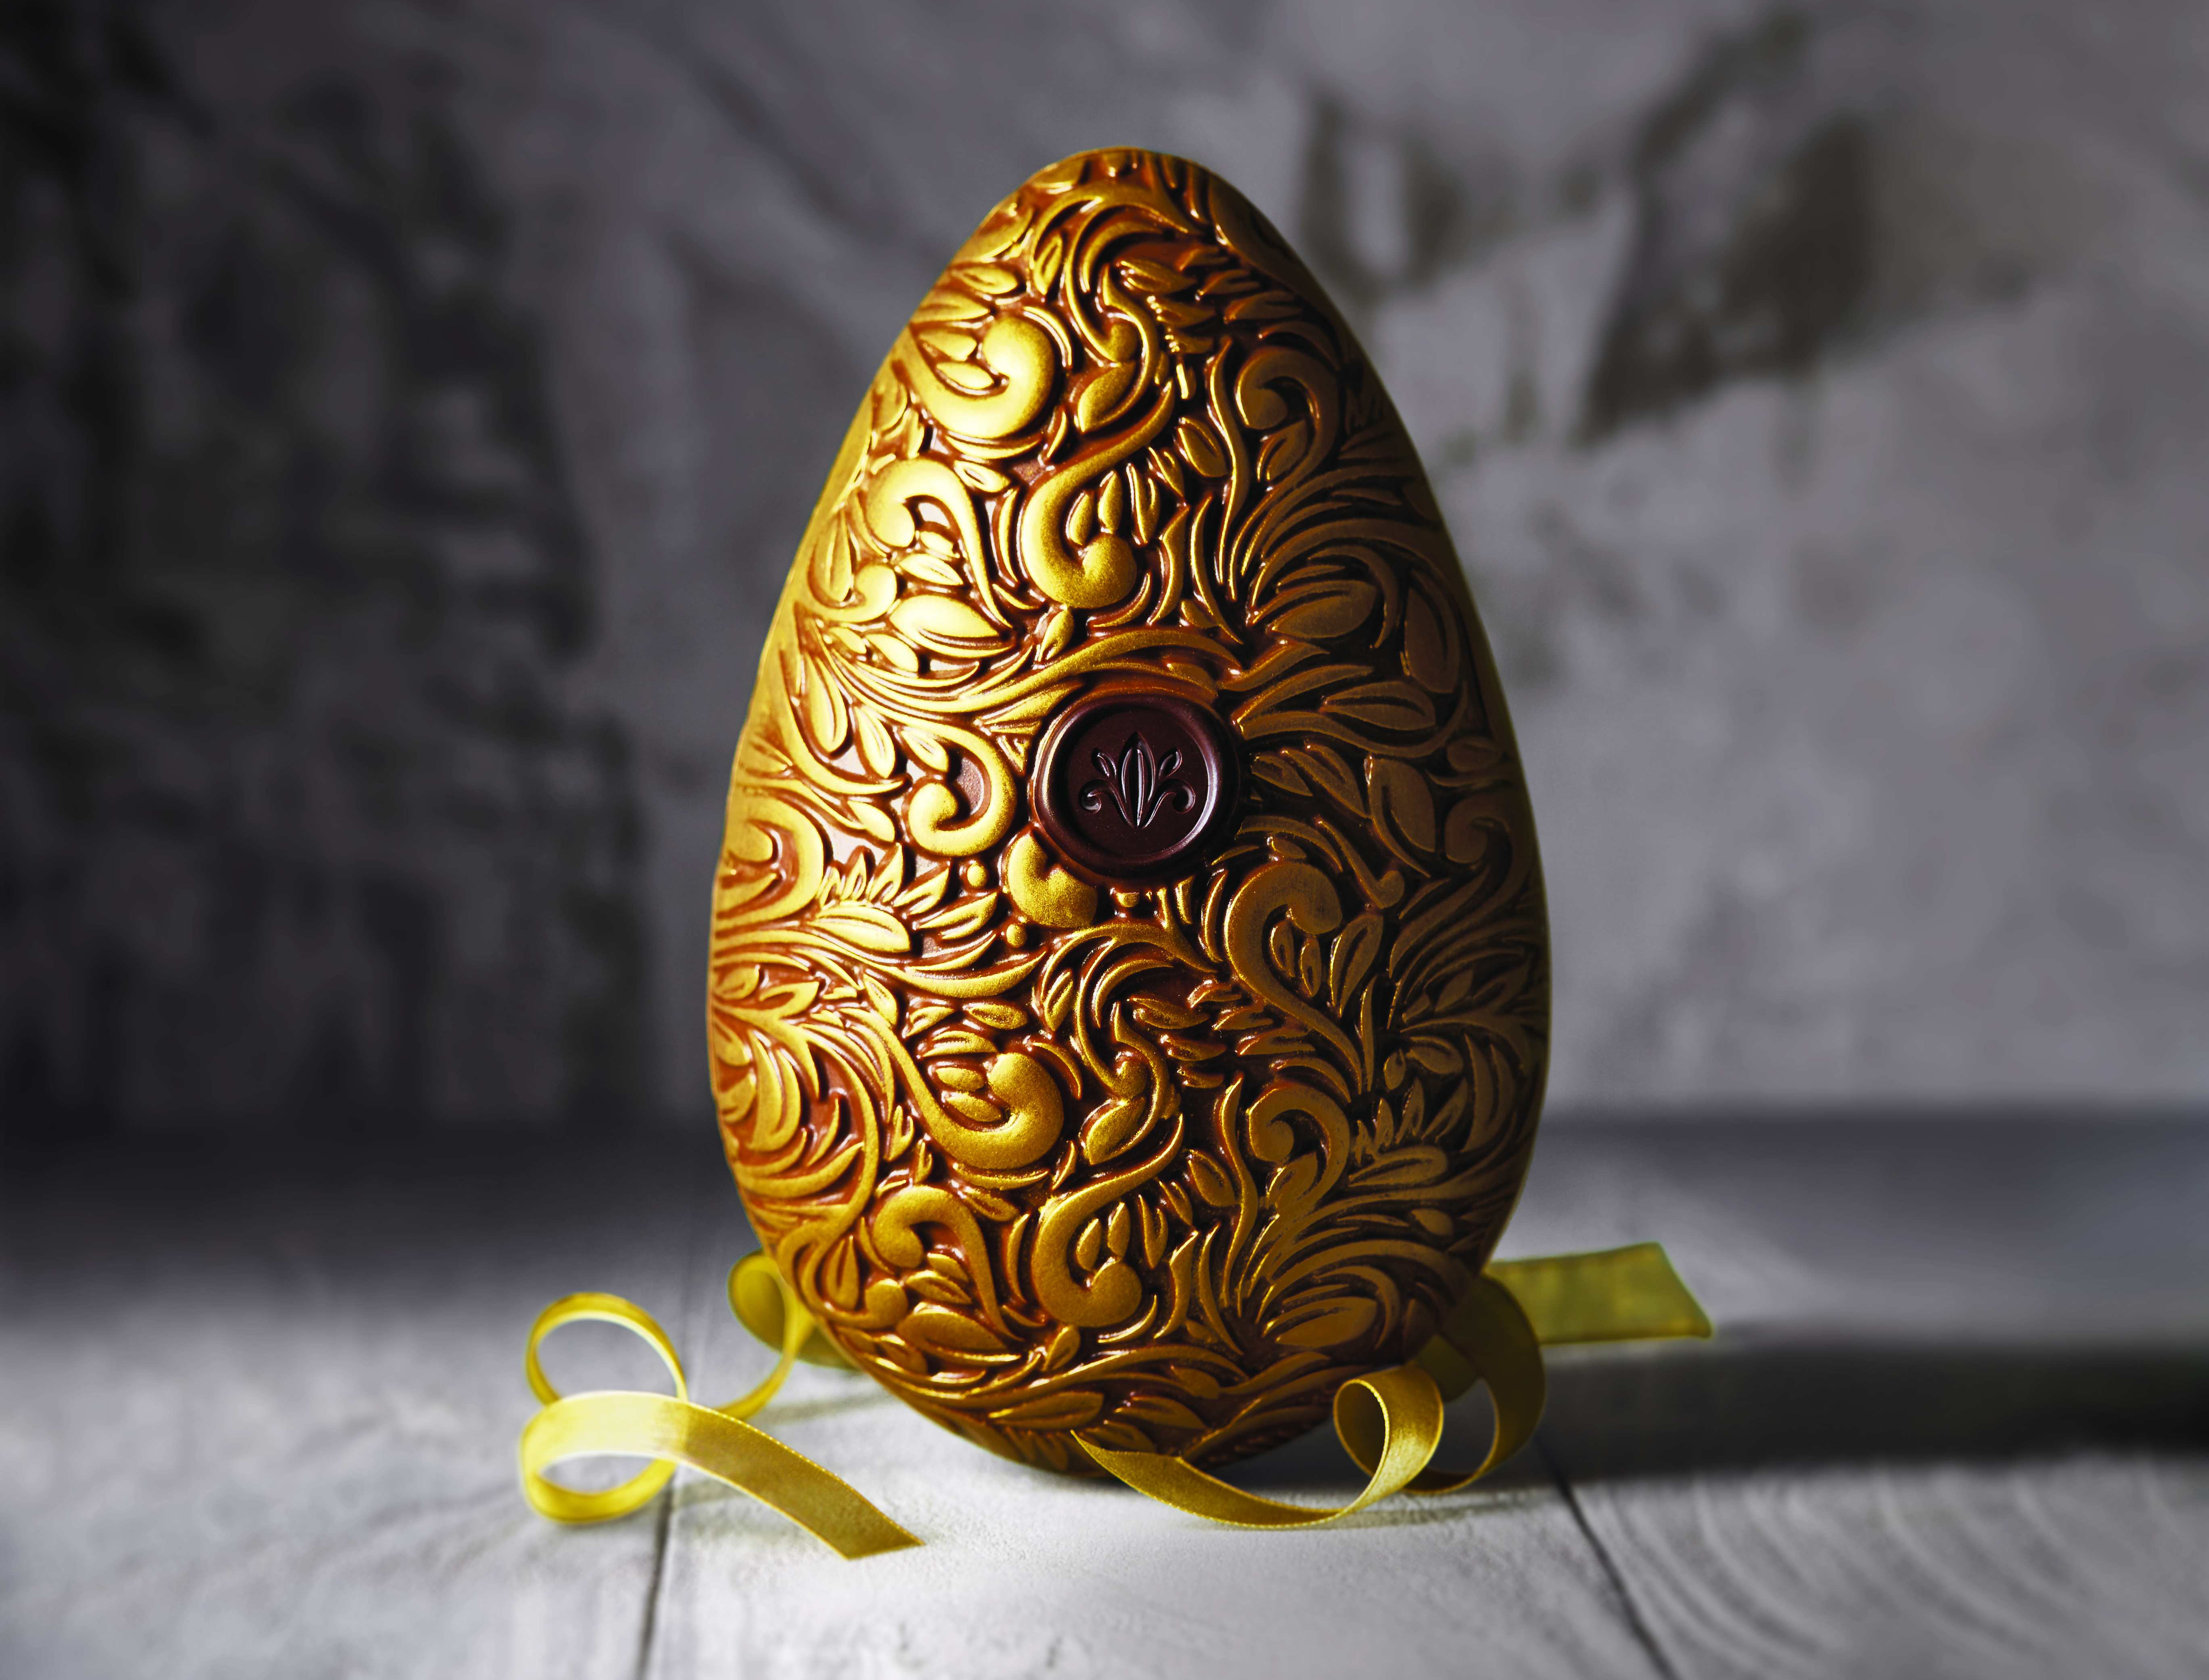 Aldi Specially Selected Exquisite Imperial Easter Egg, £8.99 (Aldi/PA)